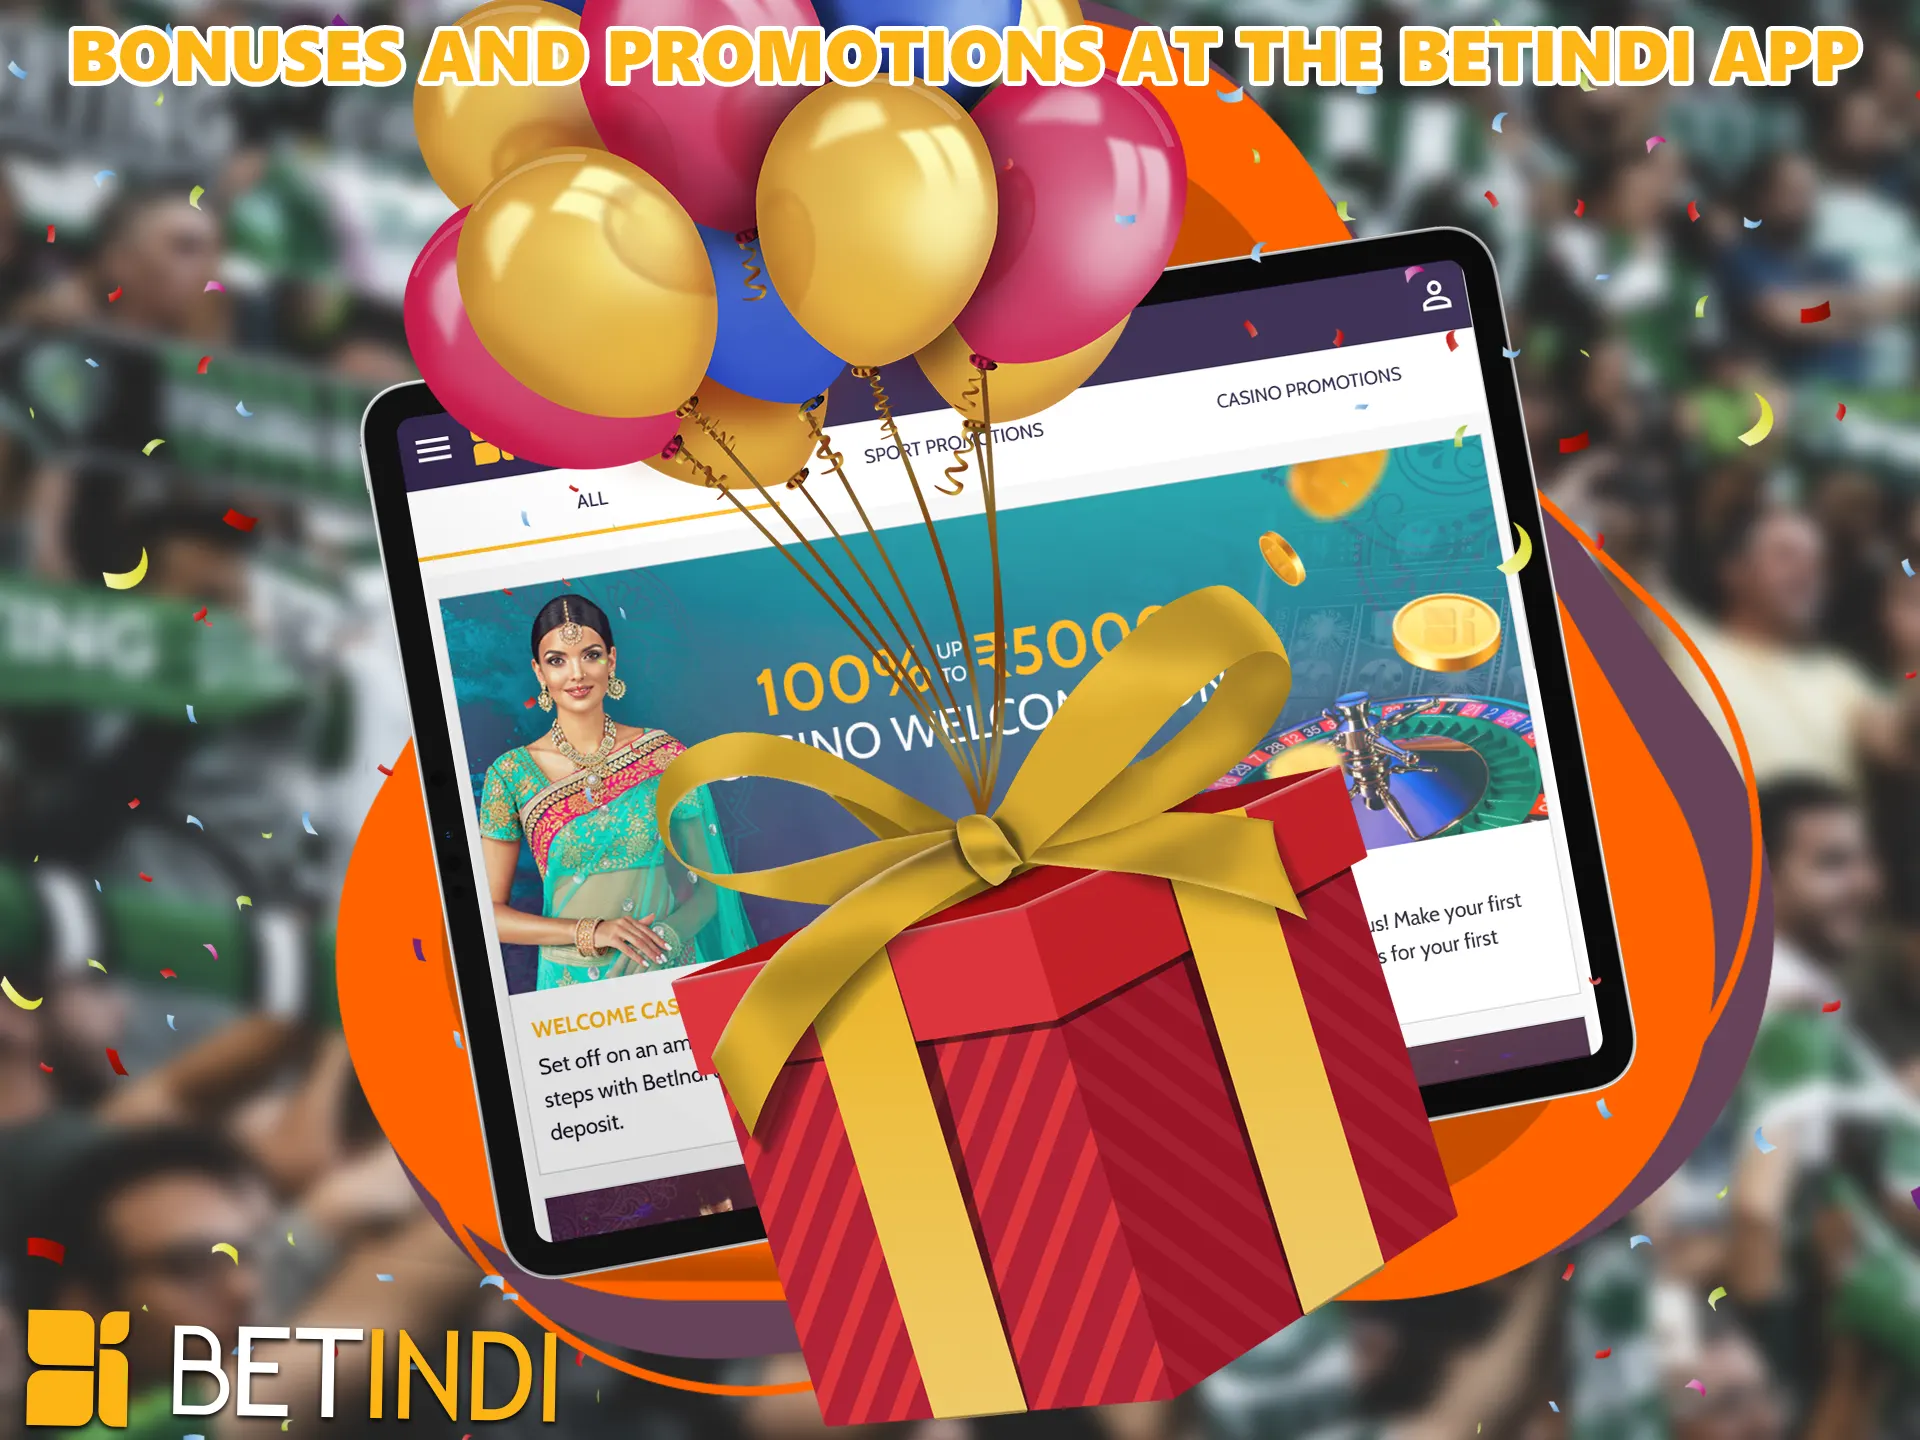 It is very difficult to replace the difference between the application and the site, both versions give generous BetIndi bonuses.